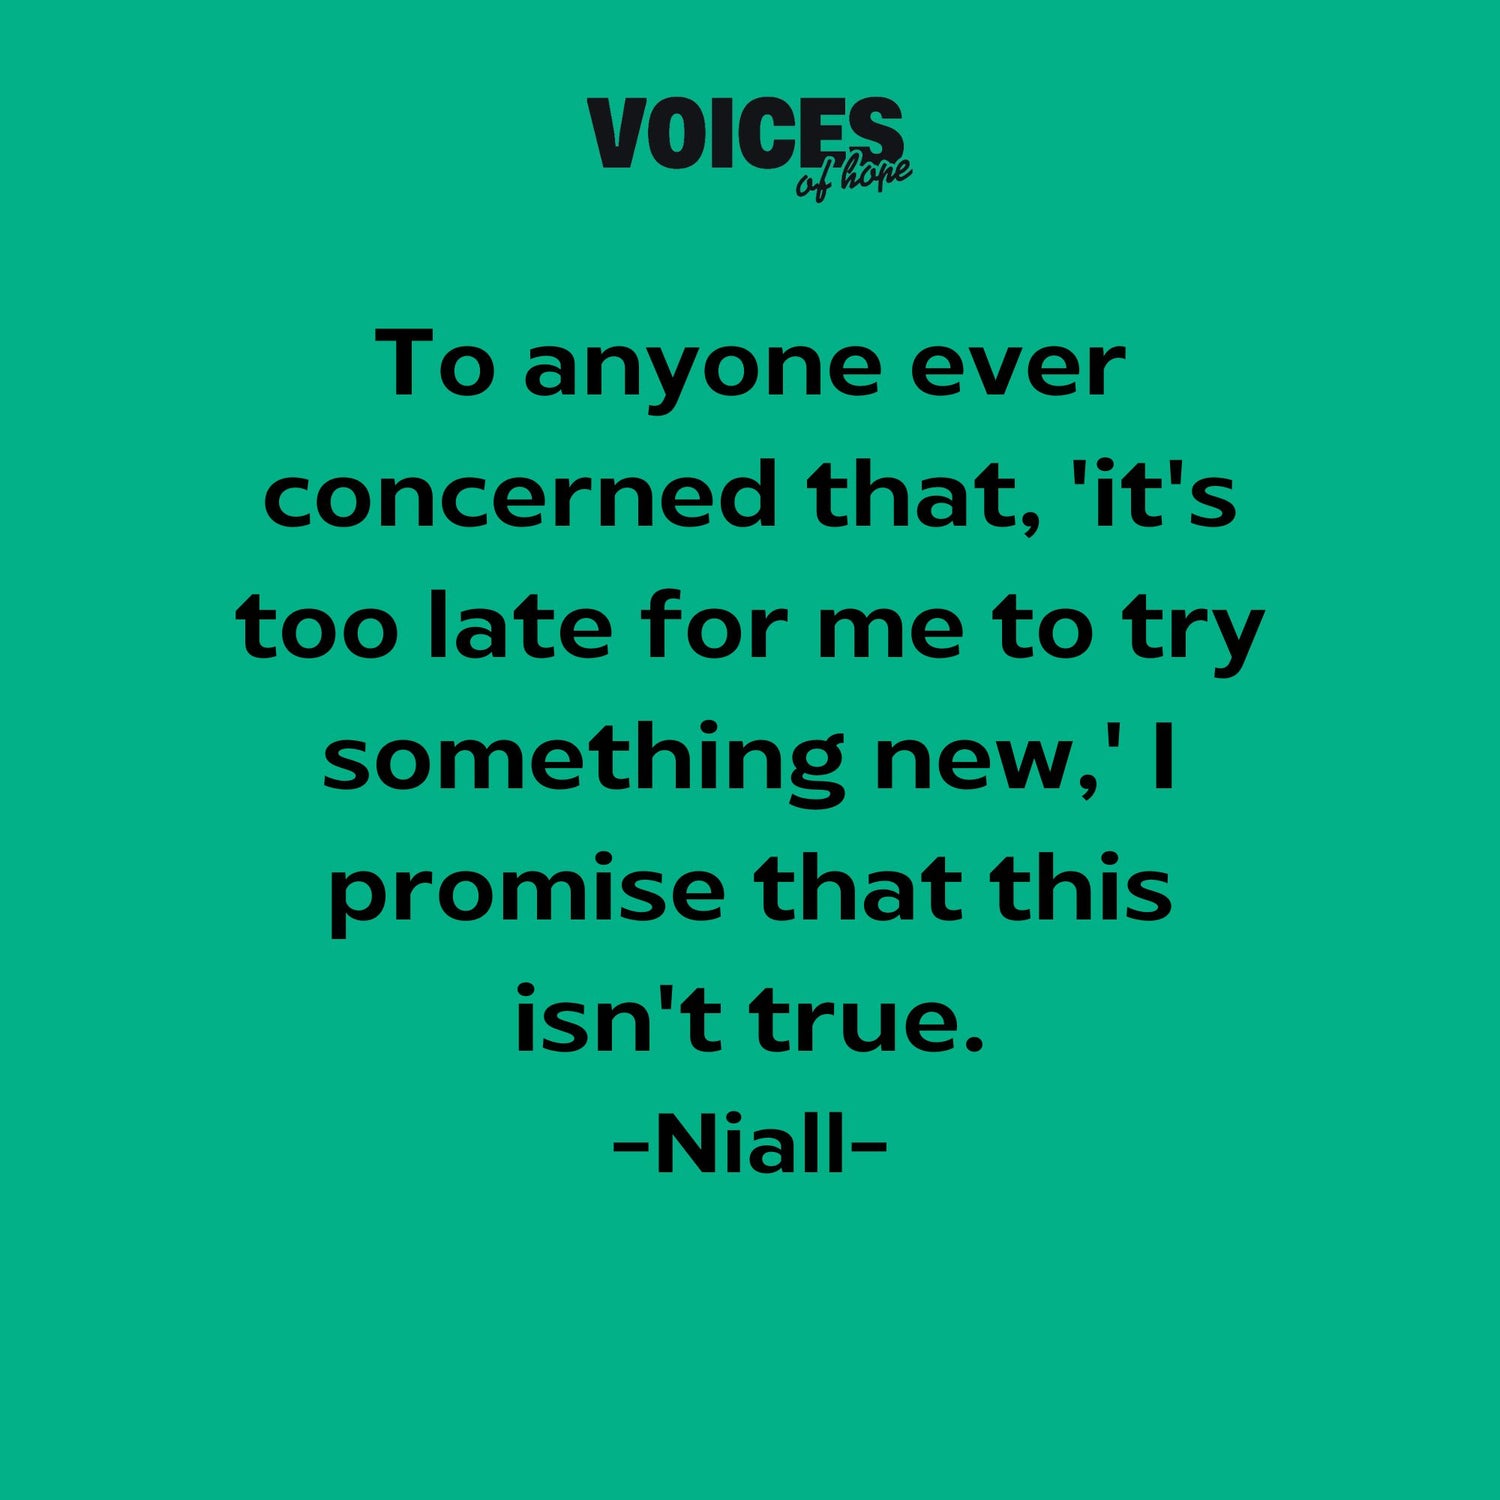 Green background with black writing that reads: "to anyone ever concerned that, 'it's too late for me to try something new,' I promise that this isn't true. Niall."